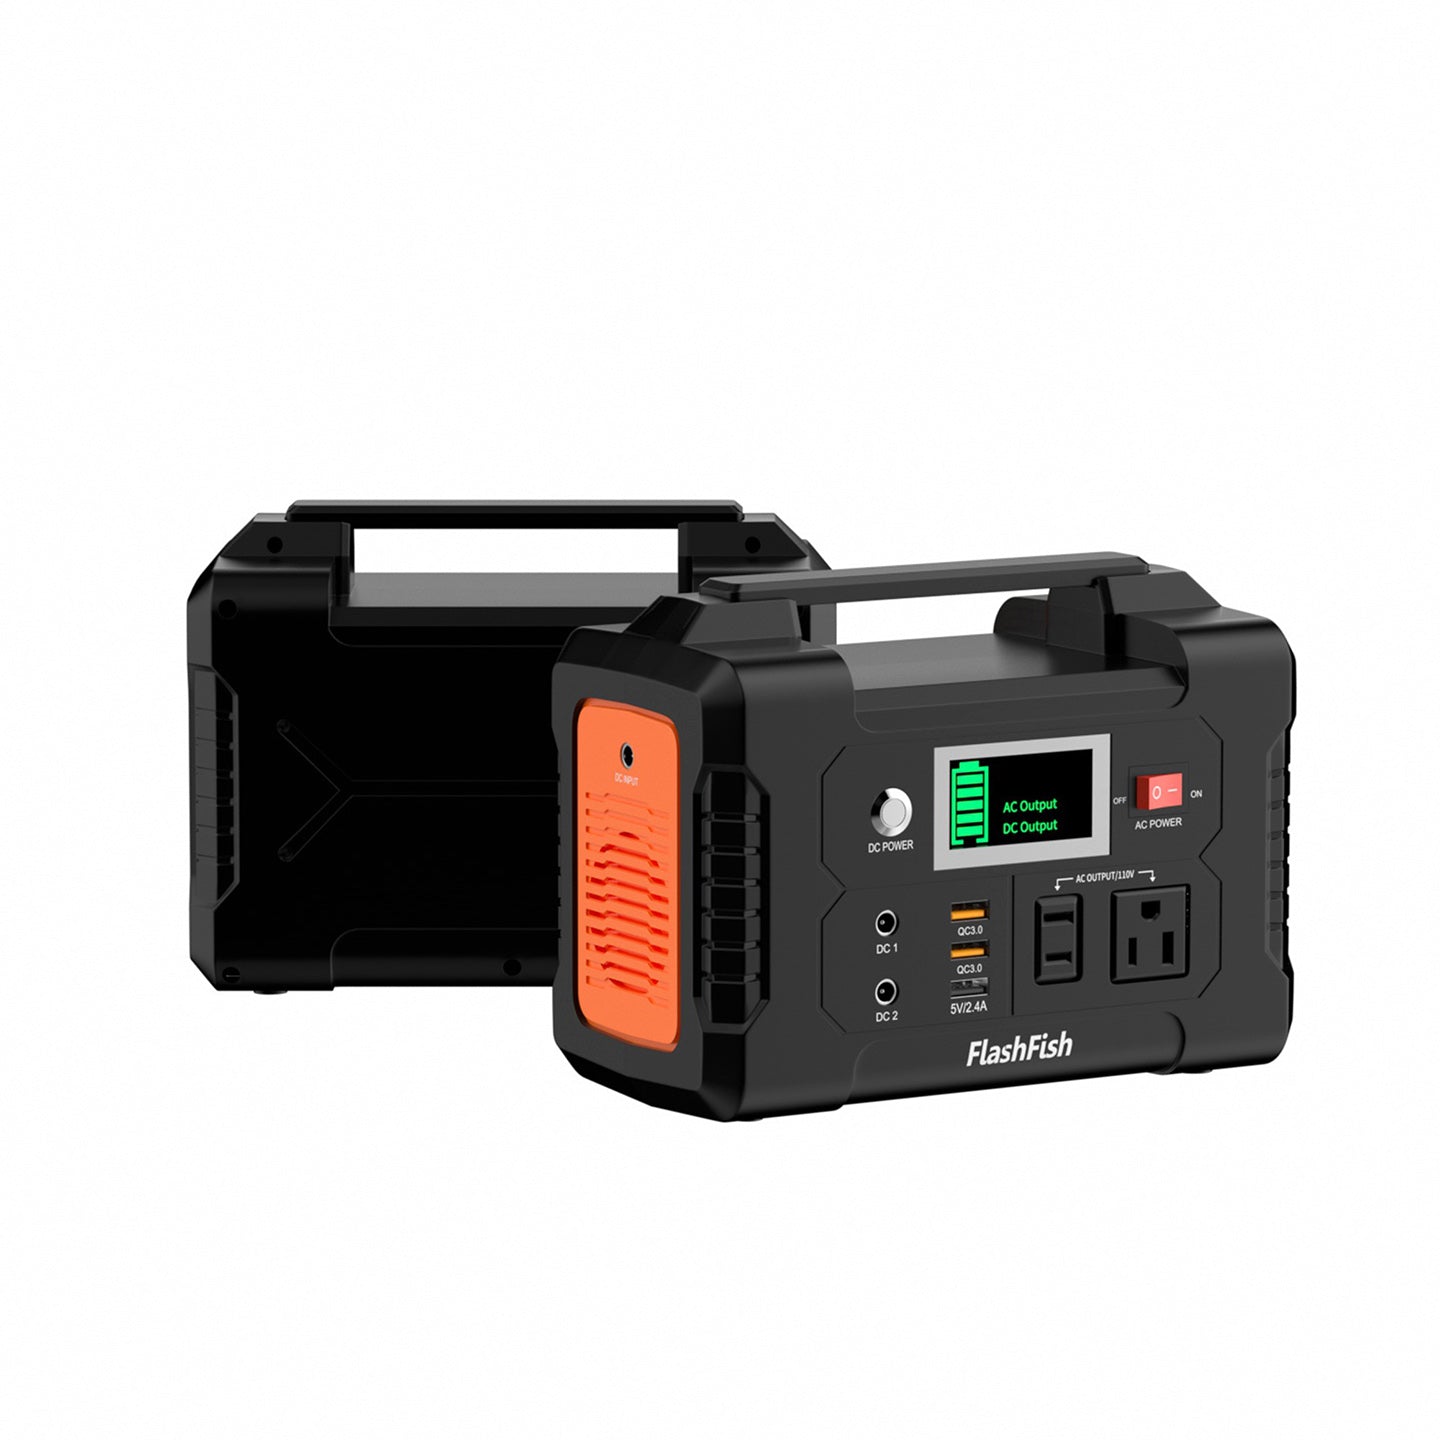 front and back view portable power station, Flashfish e200, outdoor power supply, emergency power, battery backup, 